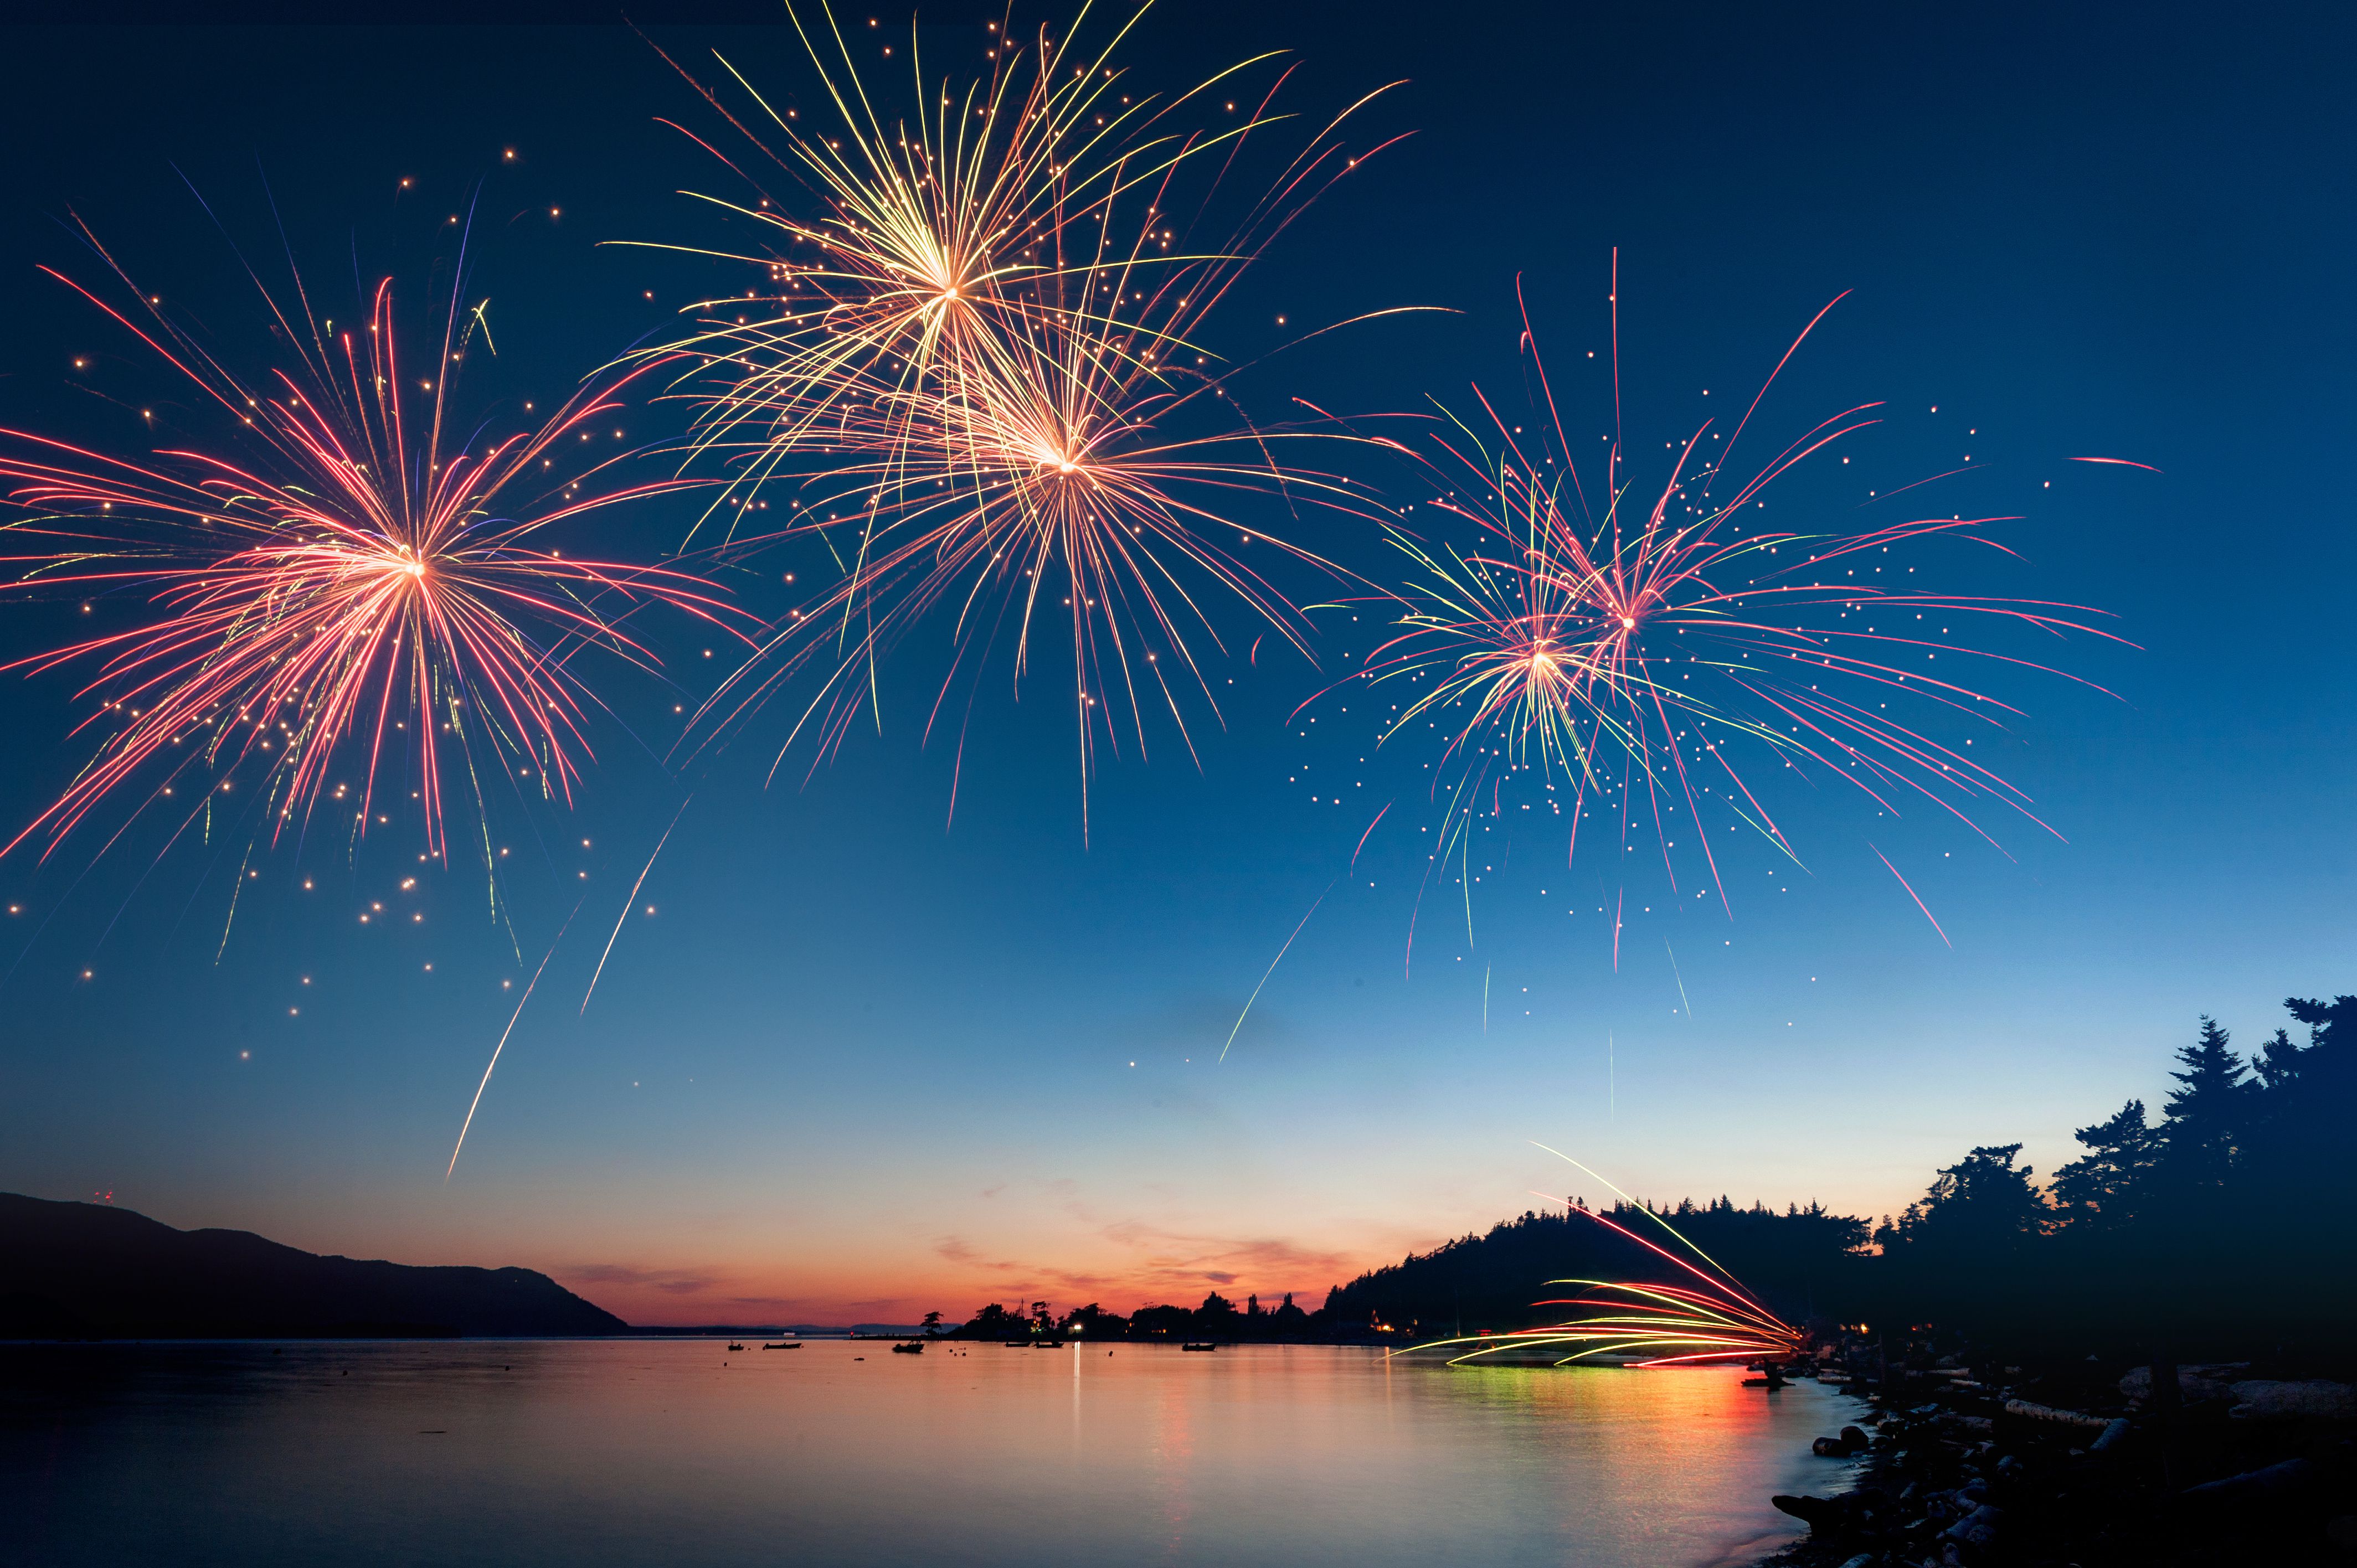 low-angle-view-of-firework-display-over-river-during-sunset-604213021-57752e7b3df78cb62c11aba4.jpg